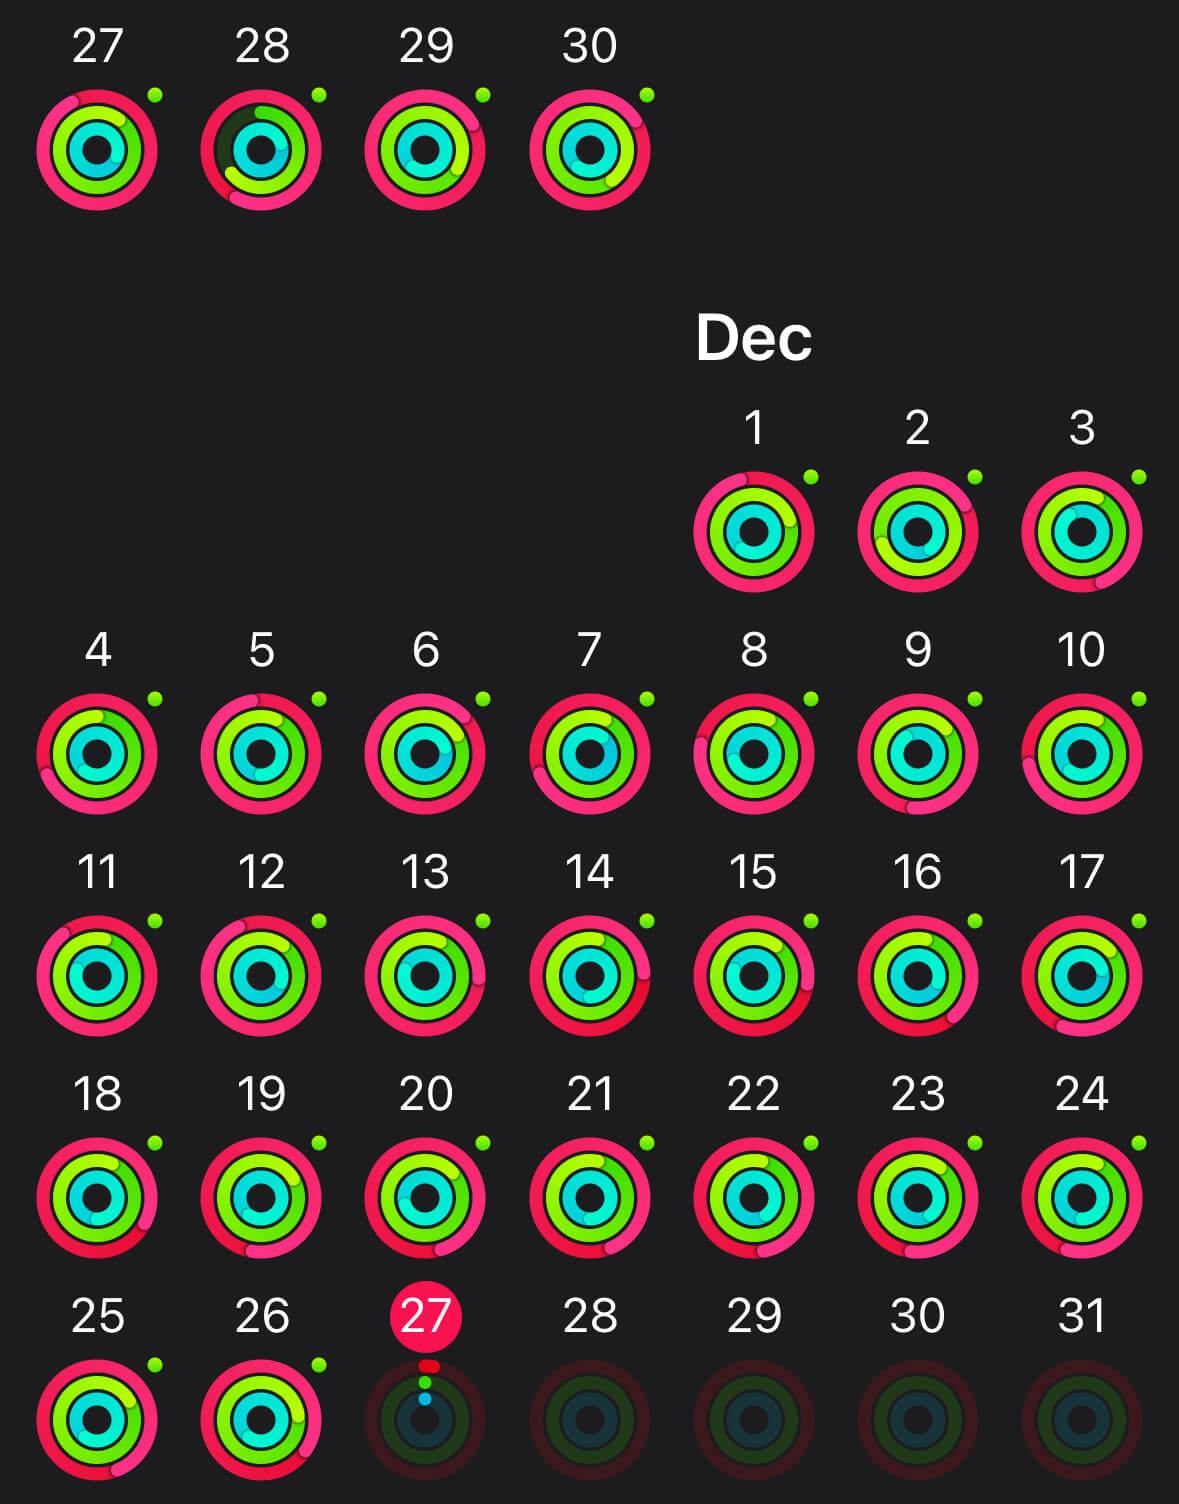 The apple Fitness application, showing closed rings every day from November 27th to December 26th, with the exception of Novemer 28th, which has an incomplete Exercise ring.